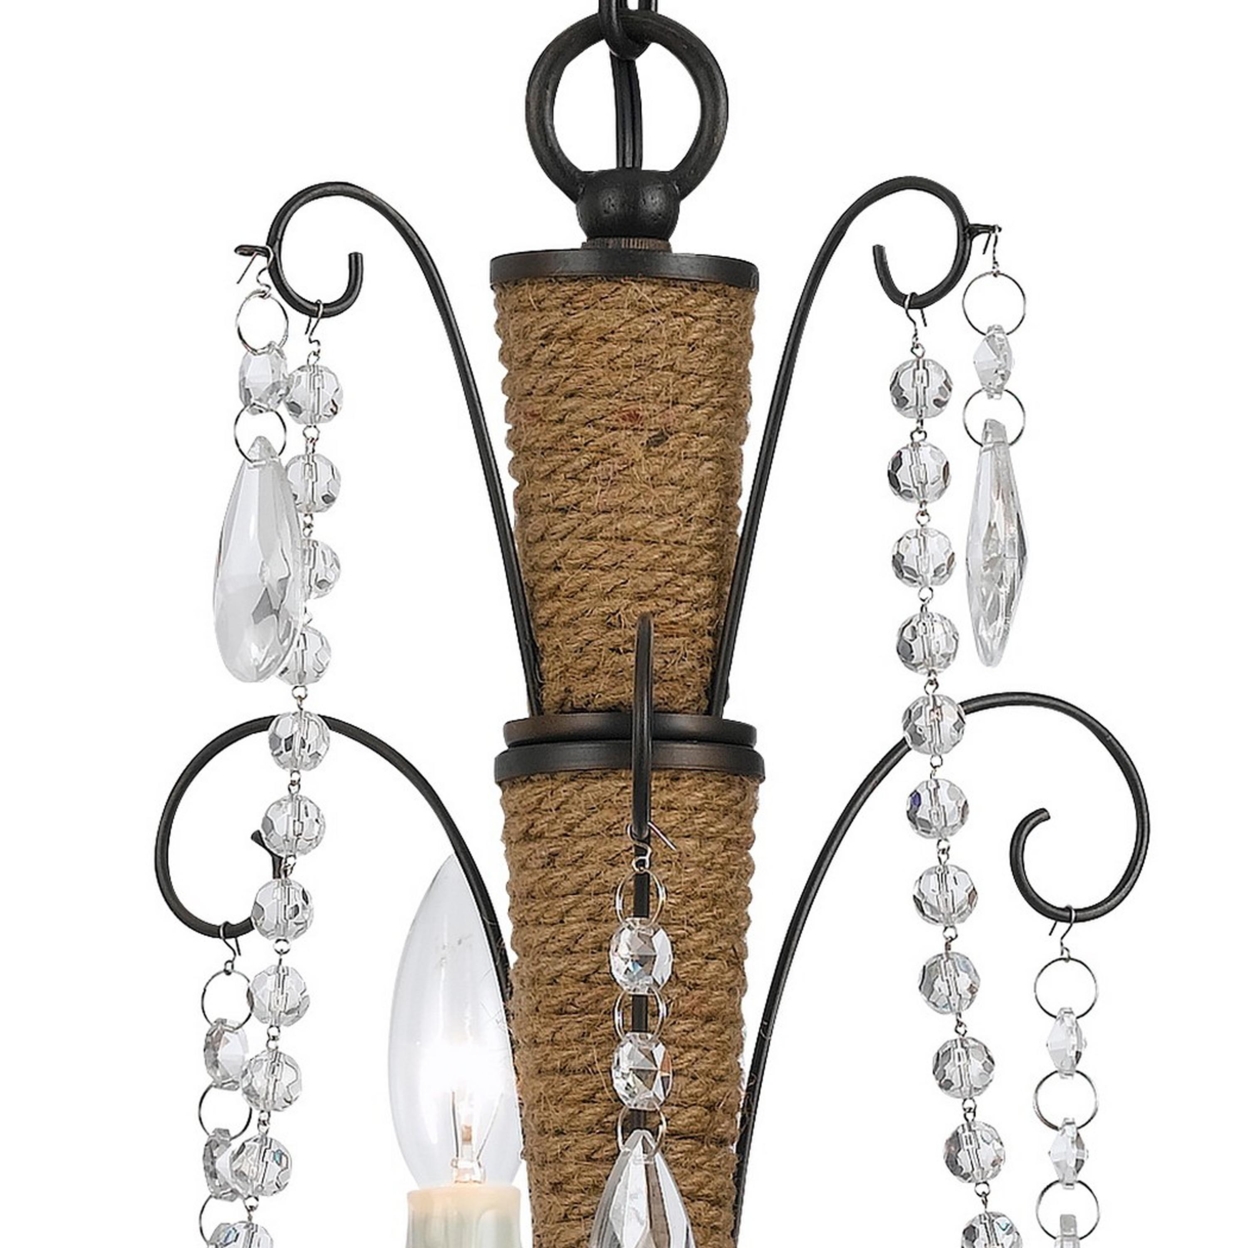 Scroll Metal Frame Chandelier With Hanging Crystals And Wrapped Rope,Bronze- Saltoro Sherpi